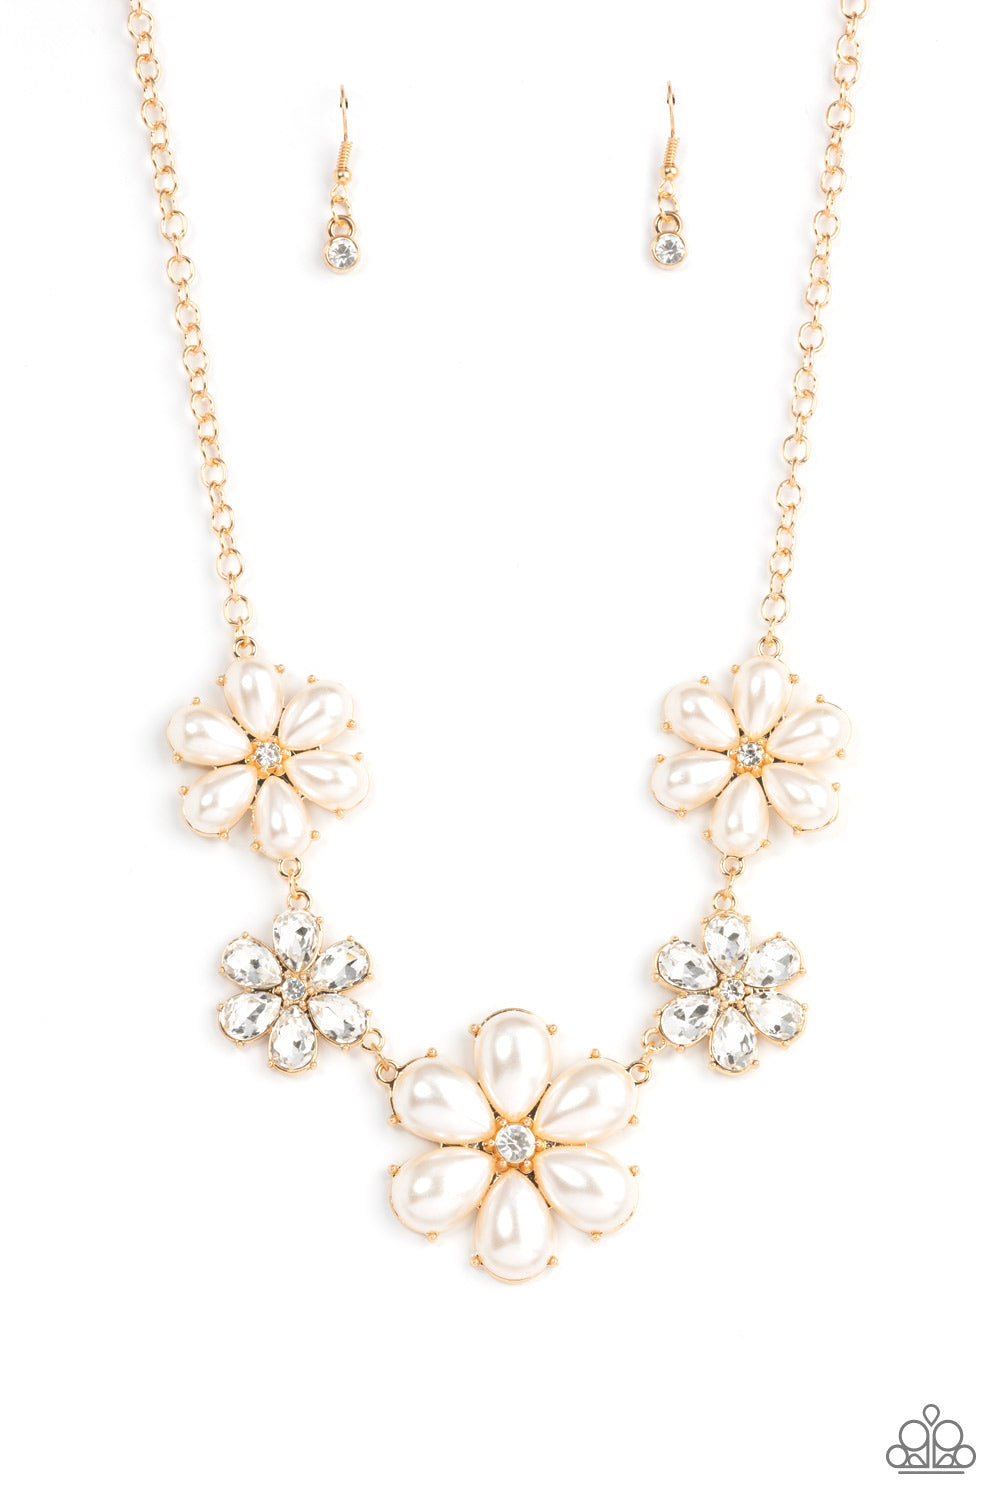 Fiercely Flowering - Gold Floral Necklaces featuring glassy white rhinestone centers, bubbly pearl petaled gold flowers gradually increase in size as they alternate with white rhinestone petaled flowers below the collar for a fierce floral fashion. Features an adjustable clasp closure.  Sold as one individual necklace. Includes one pair of matching earrings.